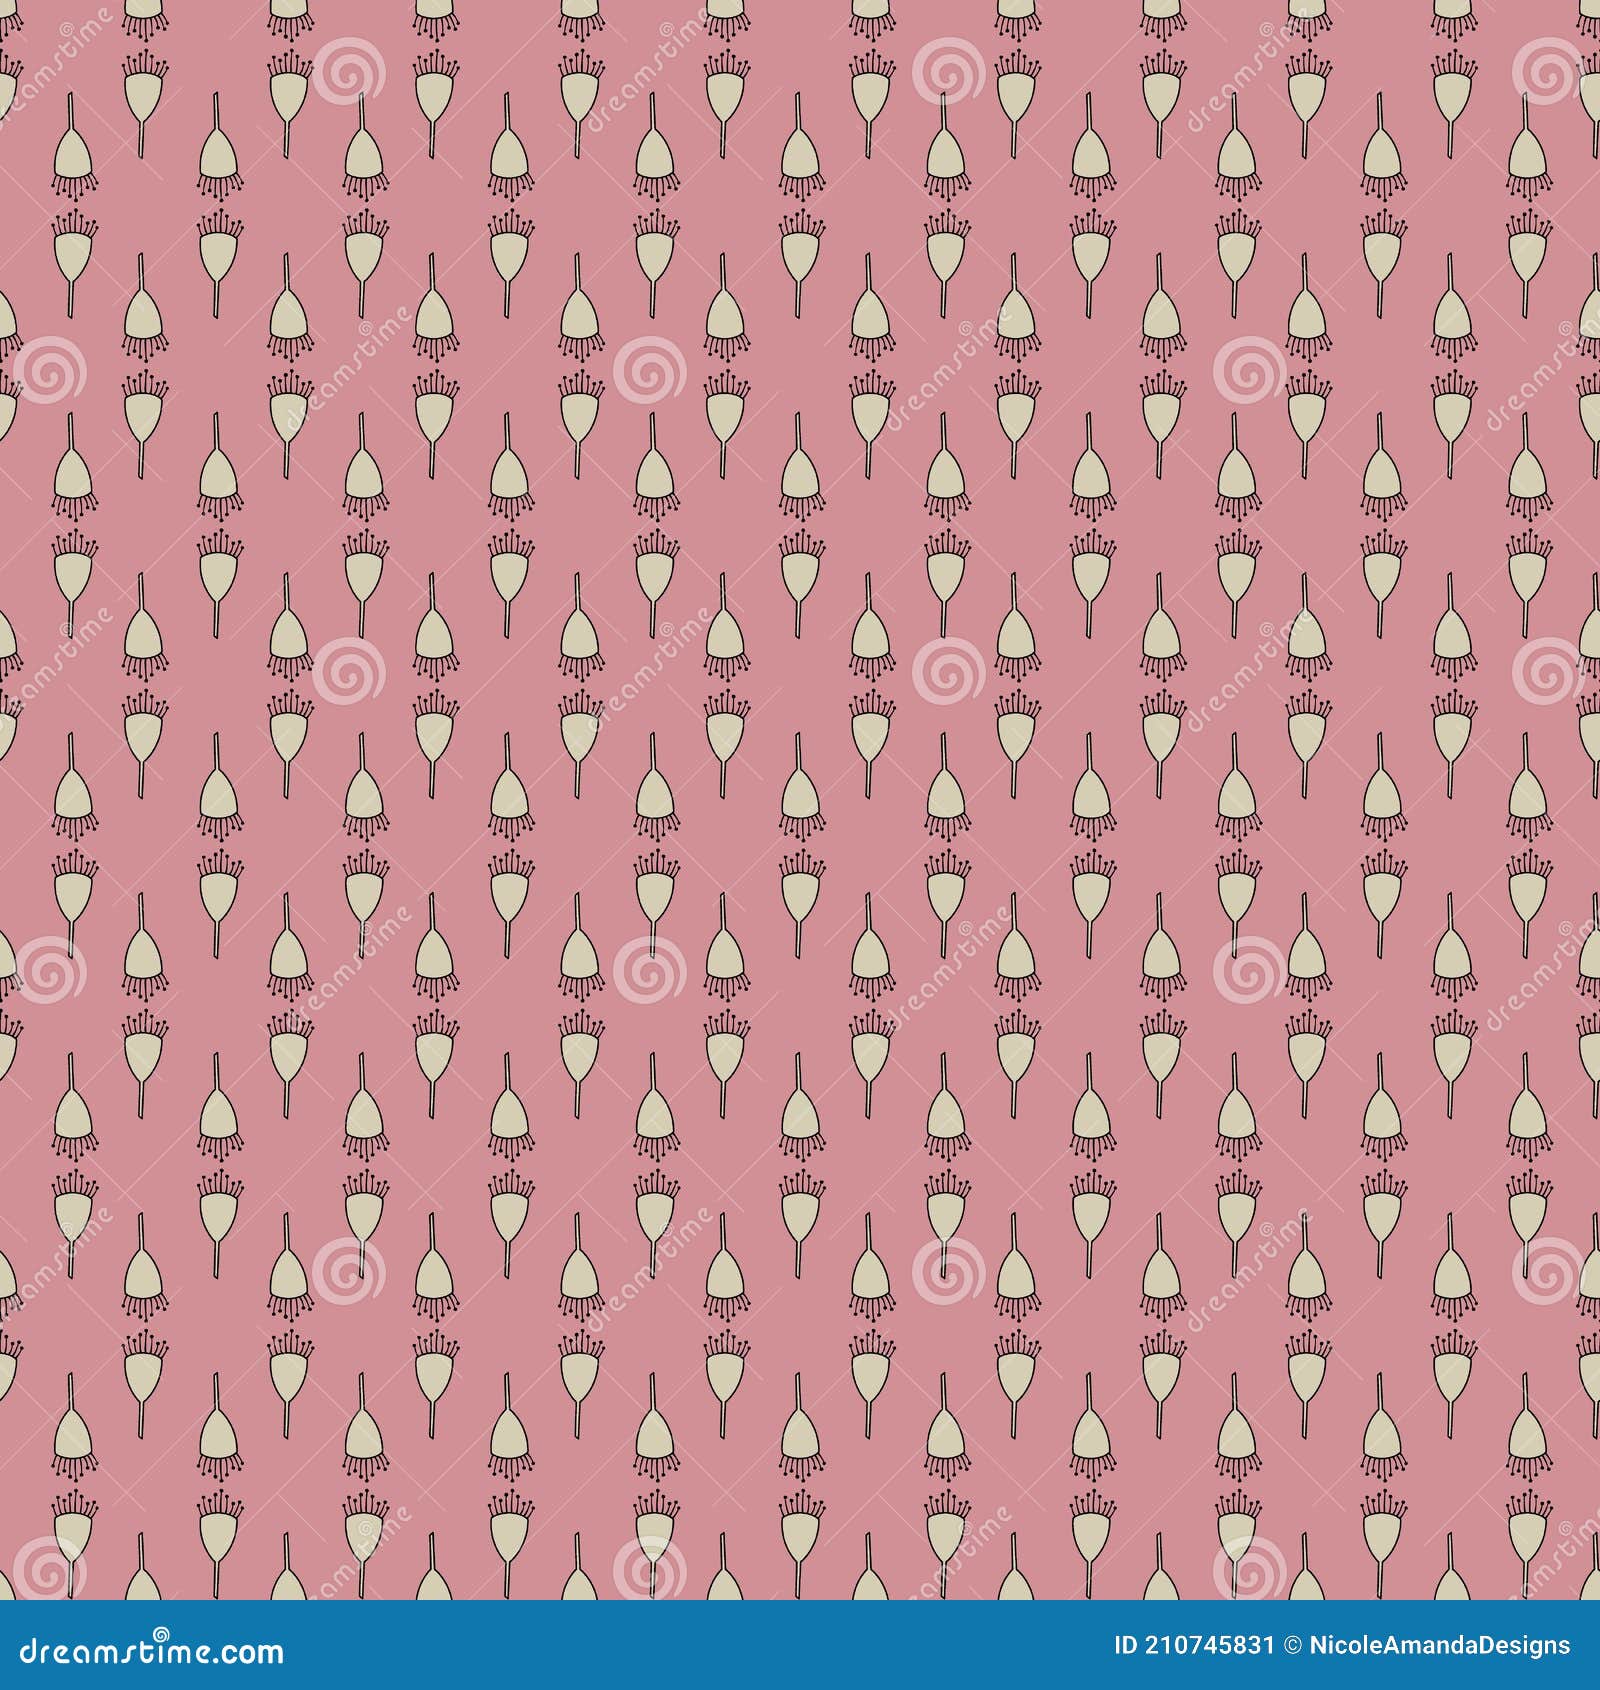 pink and beige gumnut garden themed seamless repeating pattern.